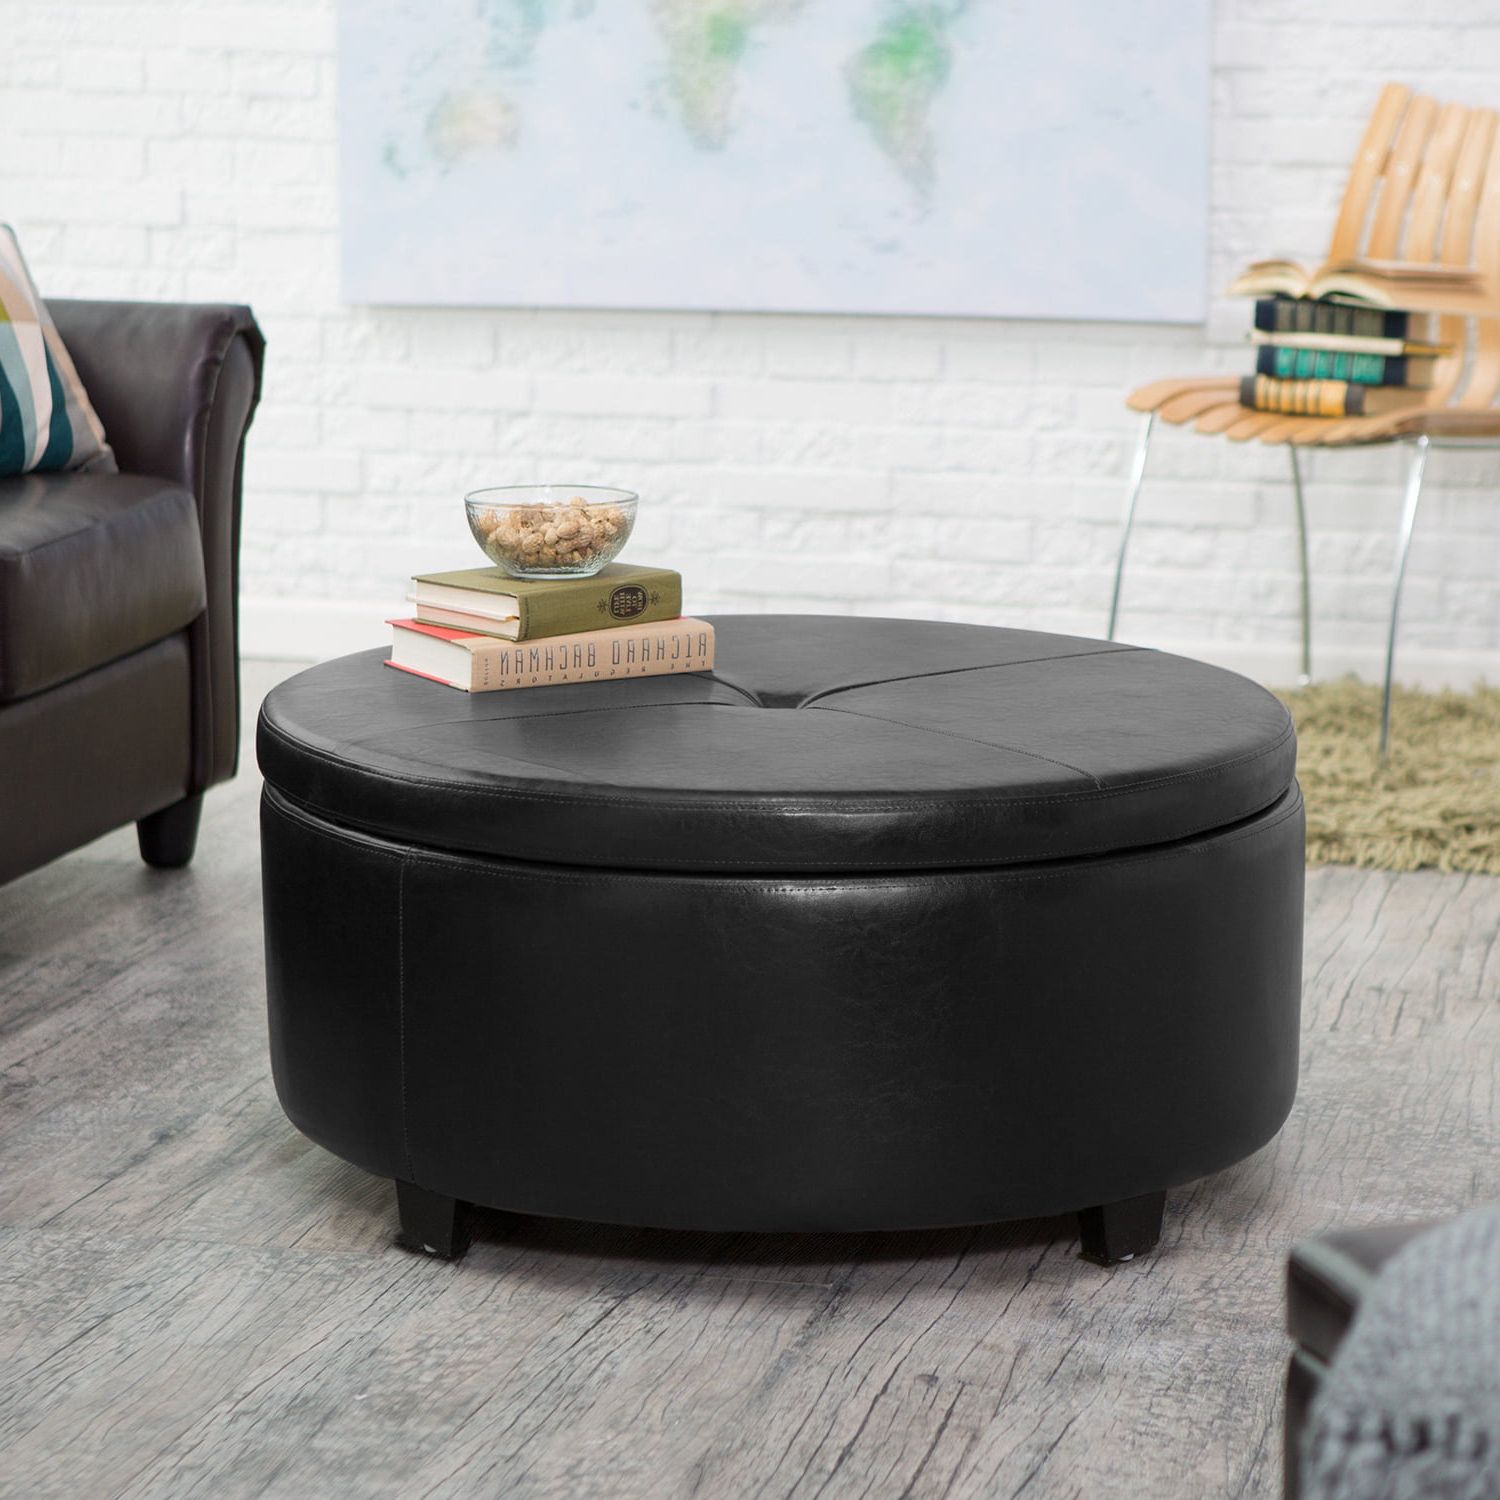 Most Popular Lacoo Large Round Storage Ottoman Comfort Footrest, Black Faux Leather –  Walmart Intended For 36 Inch Round Ottomans (View 12 of 15)